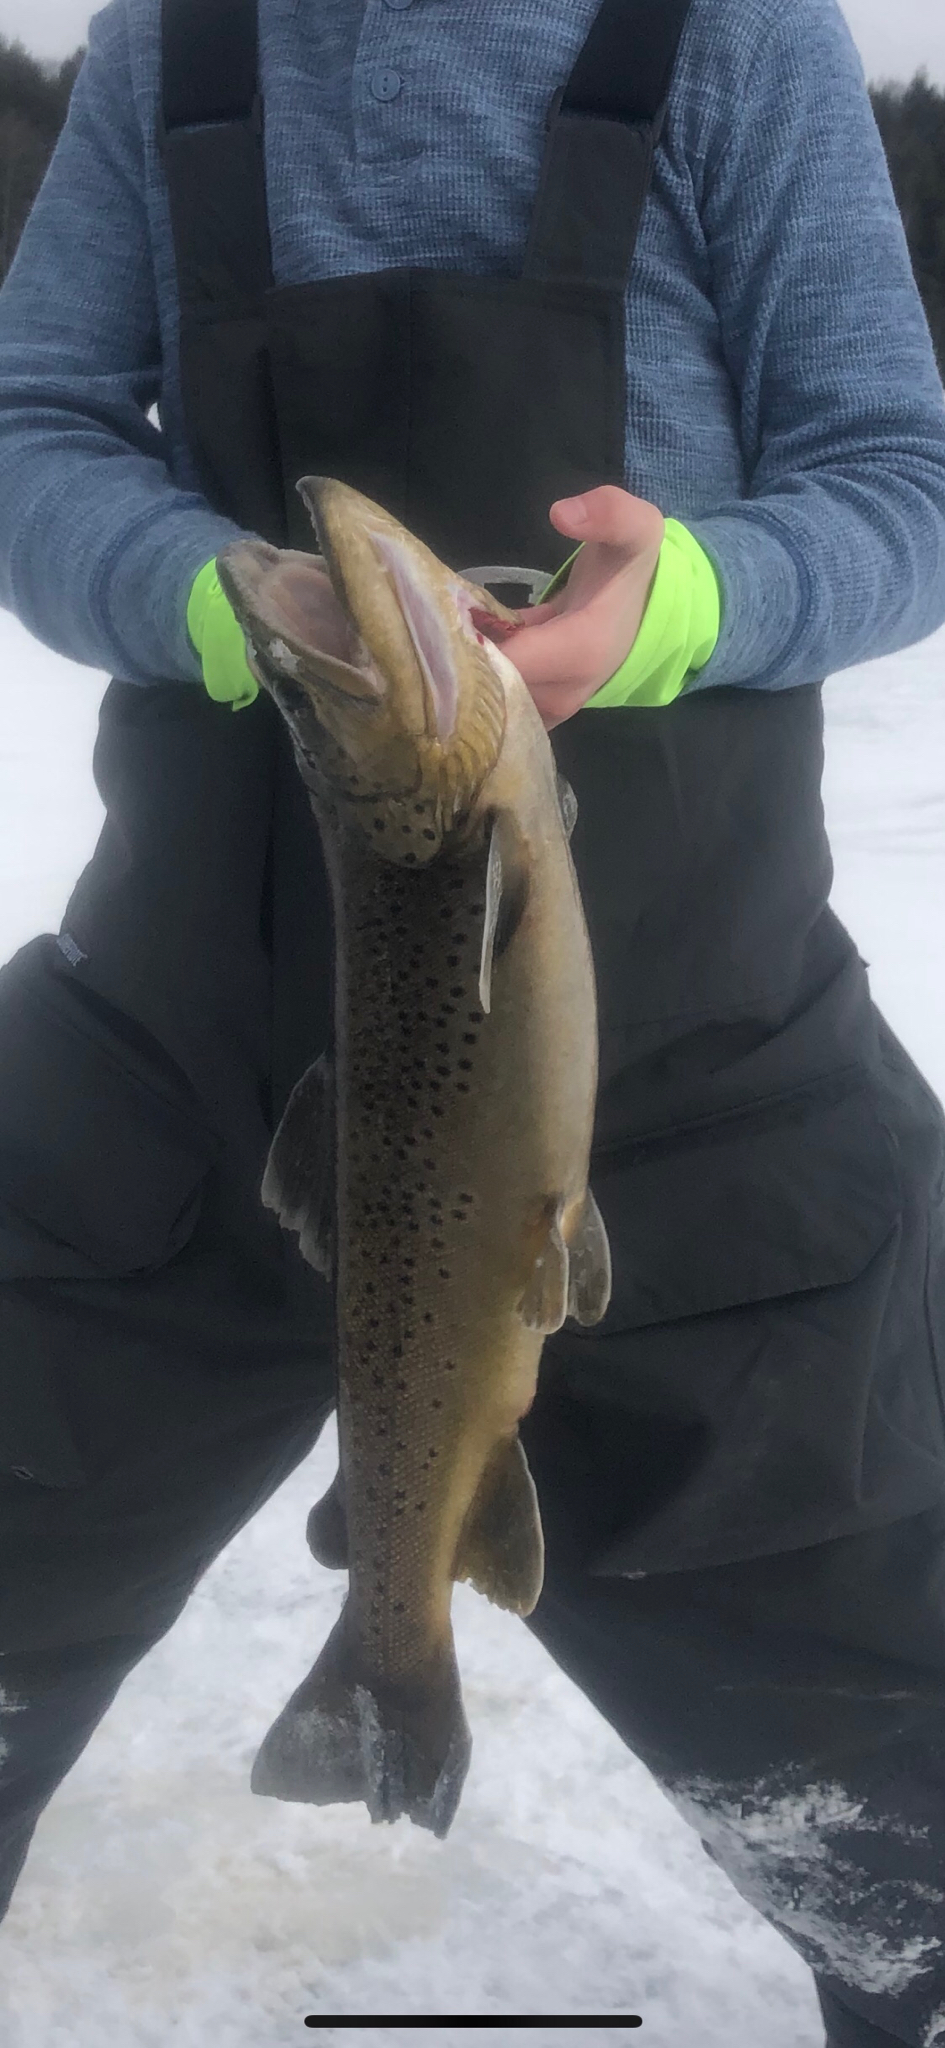 Looking for advice on Brown Trout lures - Open Lake Discussion - Lake  Ontario United - Lake Ontario's Largest Fishing & Hunting Community - New  York and Ontario Canada